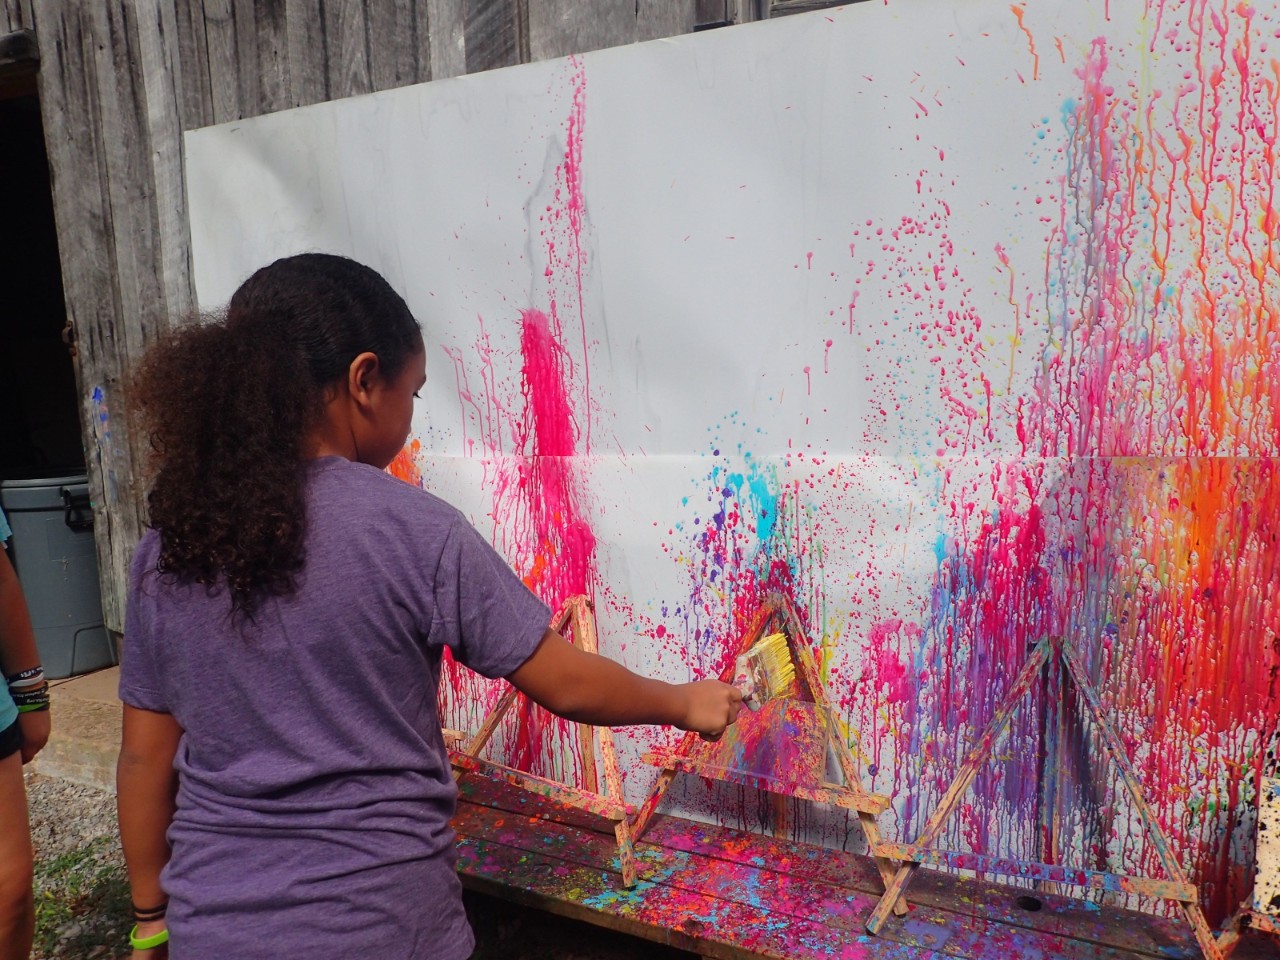 a photo of a young black girl with a purple shirt and a long ponytail holding a paintbrush in front of a huge piece of paper on a wall splattered with bright paint in pinks, oranges, reds and purples